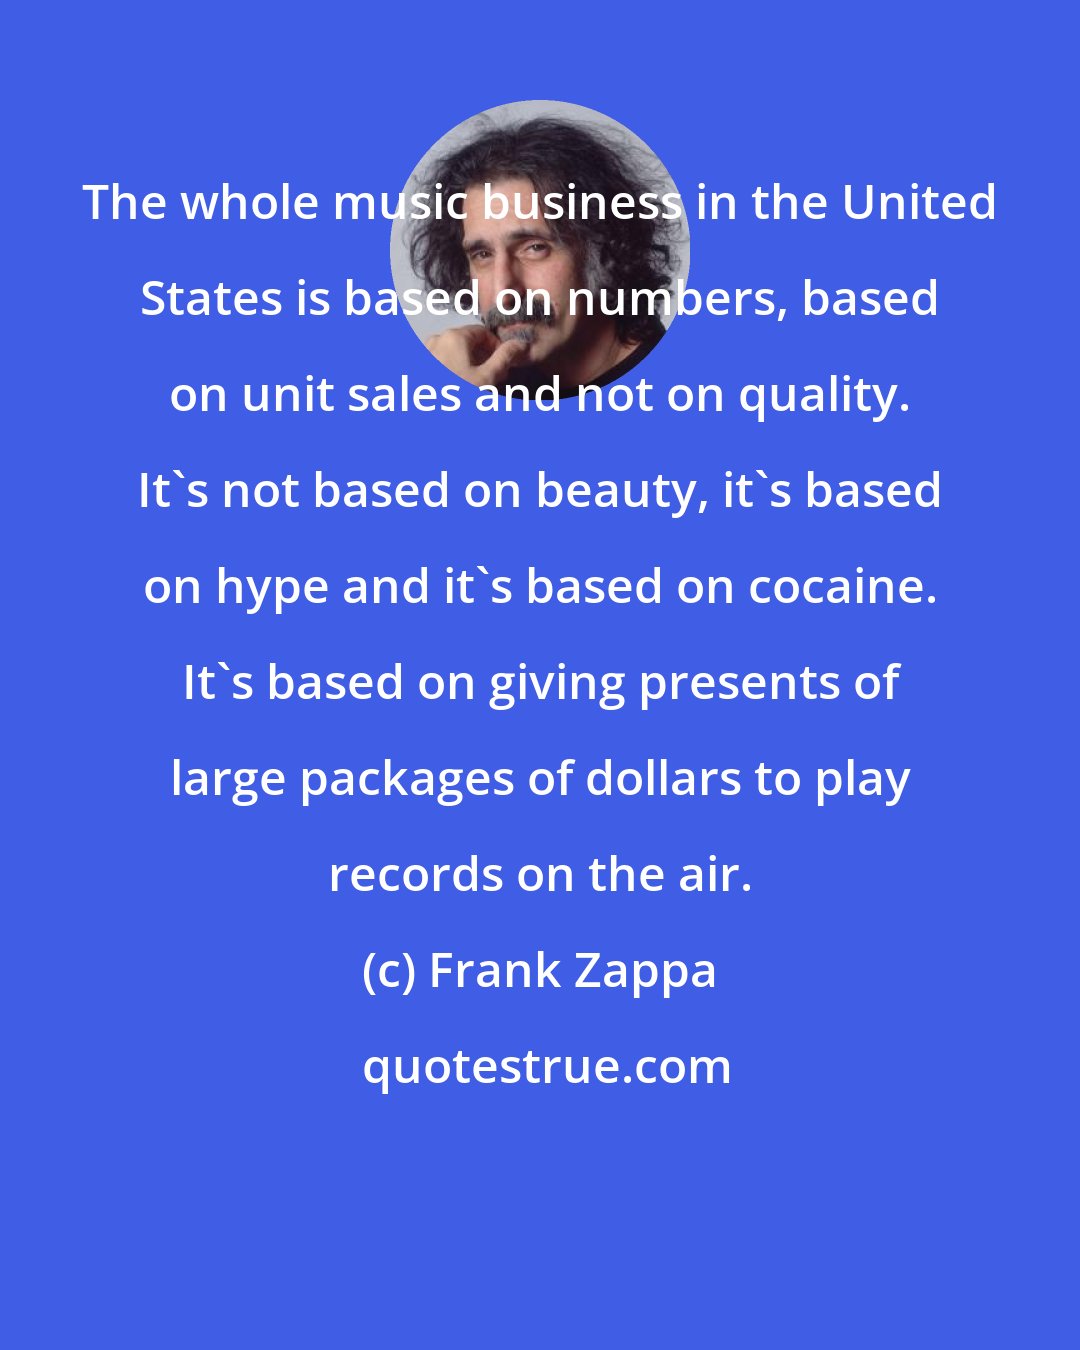 Frank Zappa: The whole music business in the United States is based on numbers, based on unit sales and not on quality. It's not based on beauty, it's based on hype and it's based on cocaine. It's based on giving presents of large packages of dollars to play records on the air.